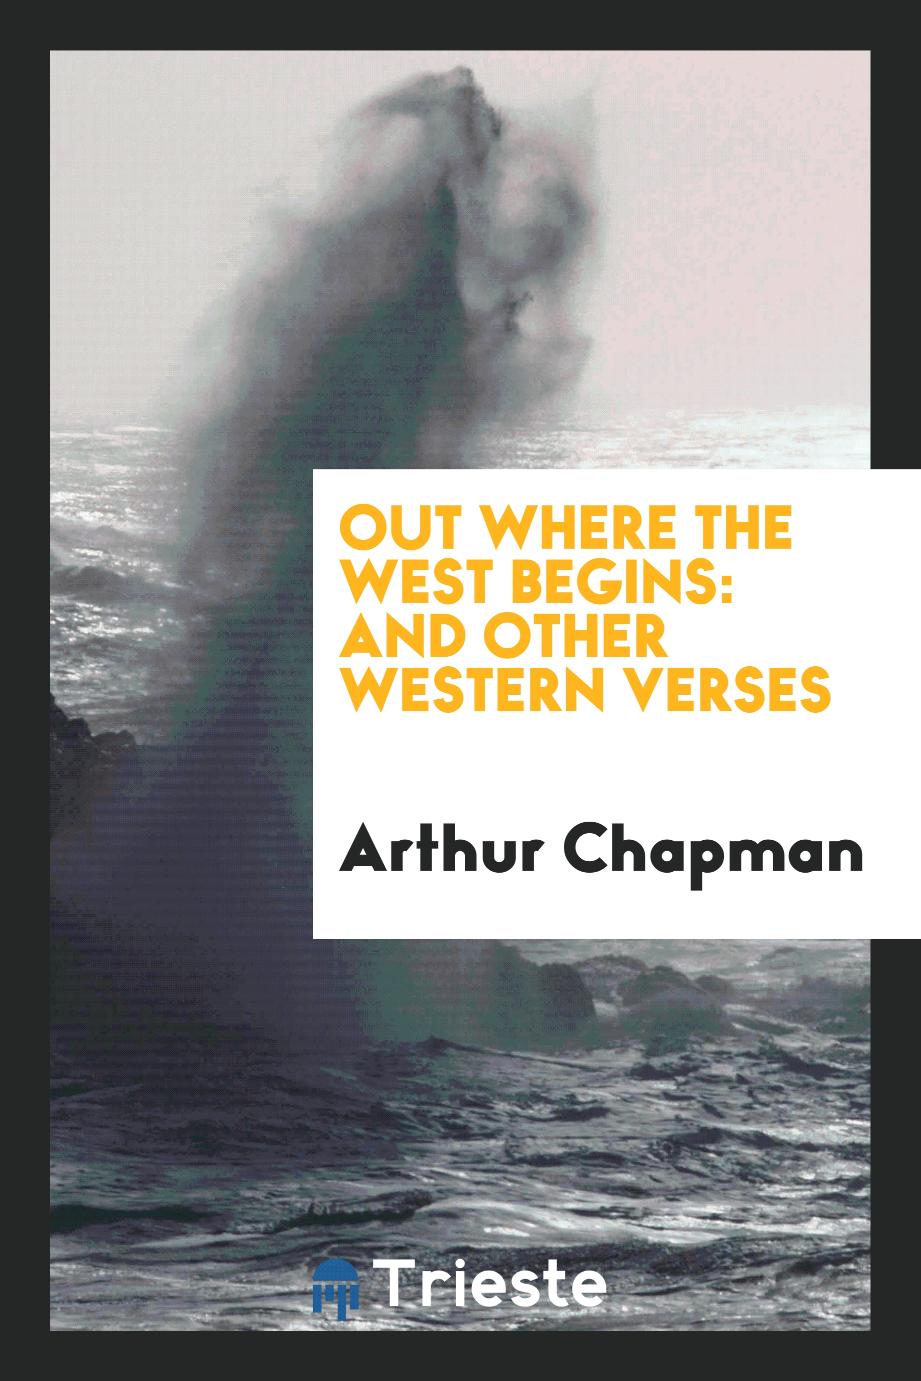 Out where the West begins: and other western verses